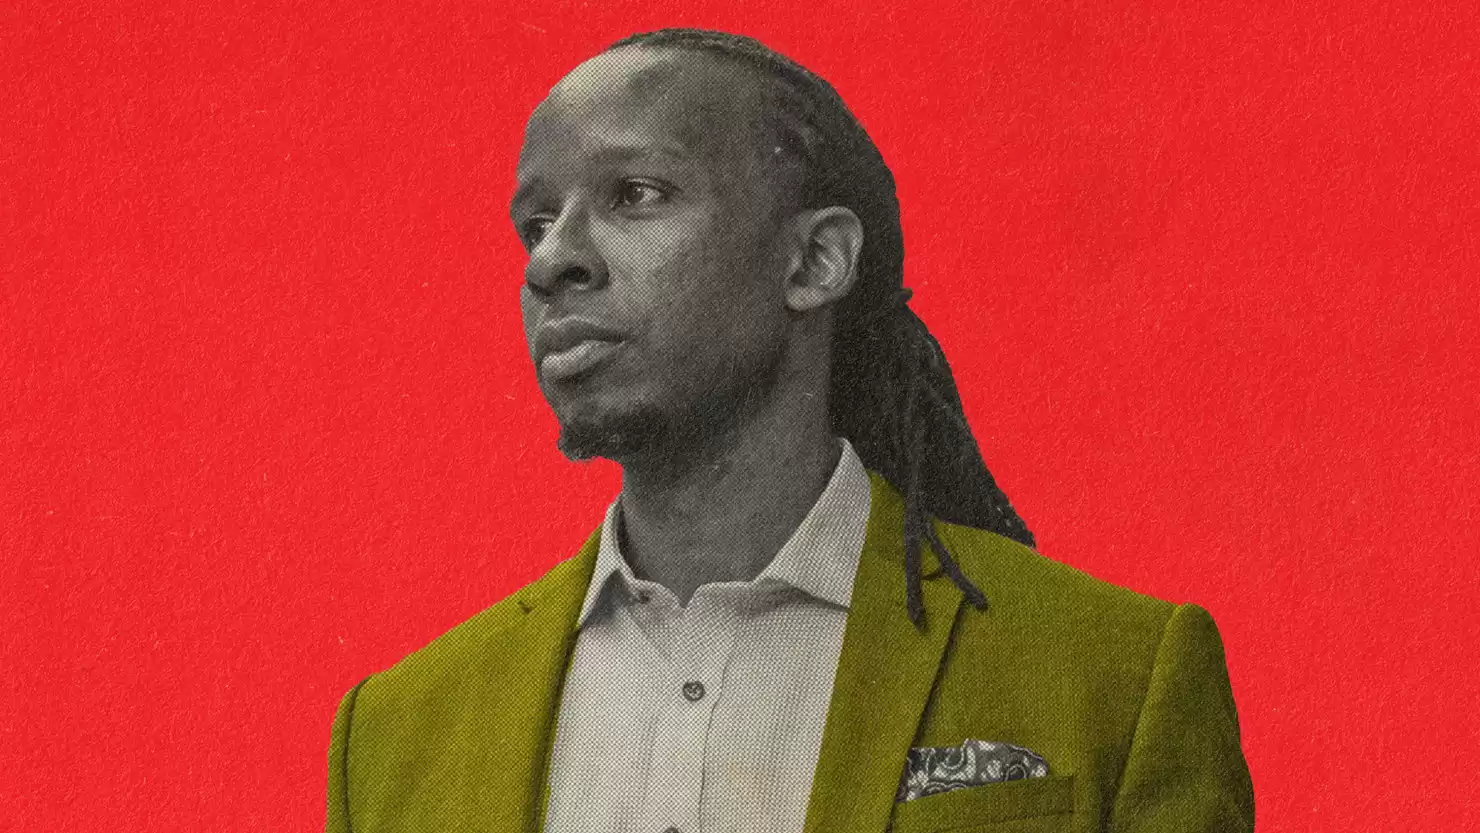 Working at Ibram Kendi's Center for Antiracist Research: A Revealing Insight from Boston University